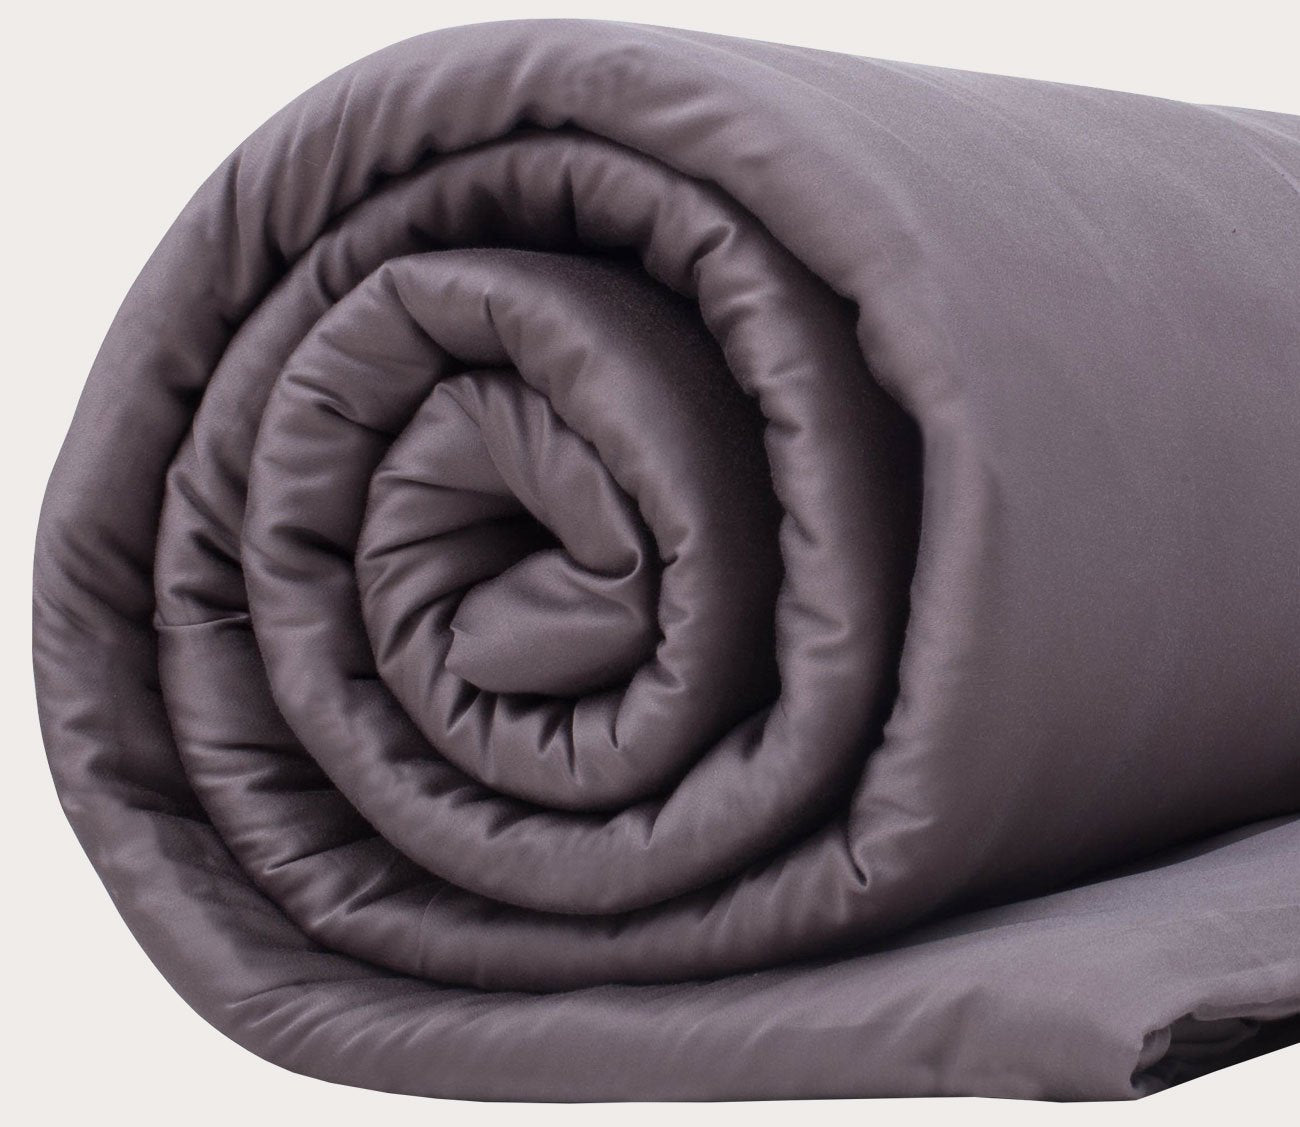 Cooling 30 Pound Weighted Blanket by Hush Blankets